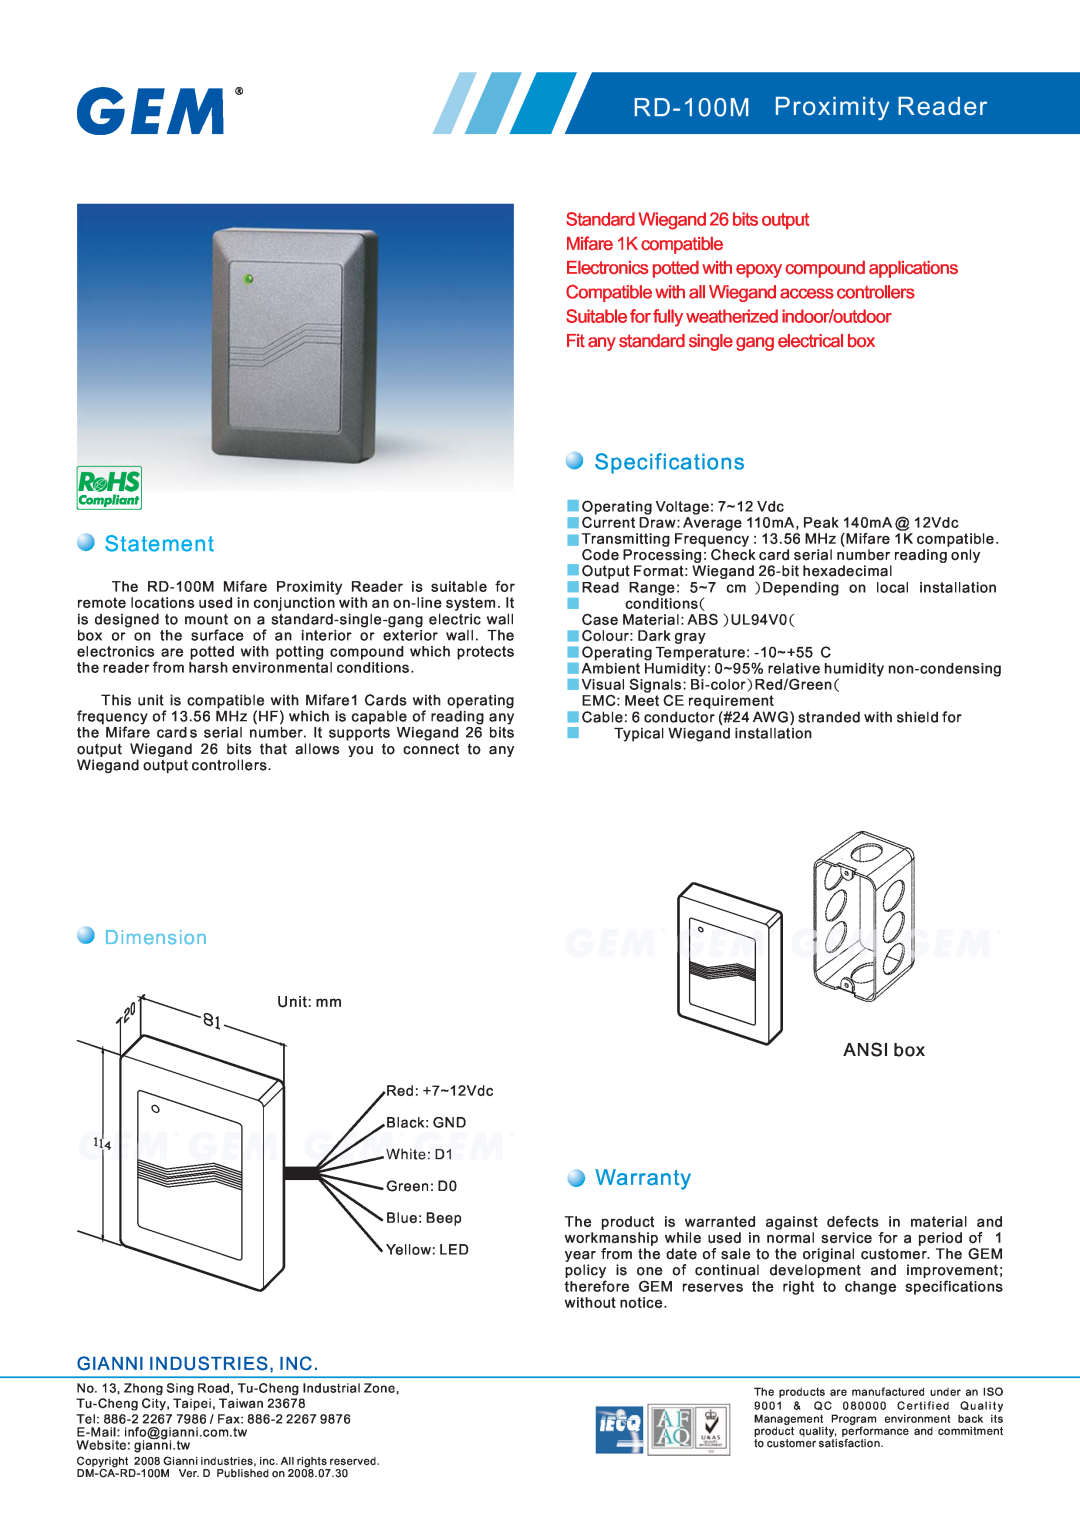 Gianni Industries specifications RD-100MProximity Reader, Statement, Specifications, Warranty, Dimension, ANSI box 